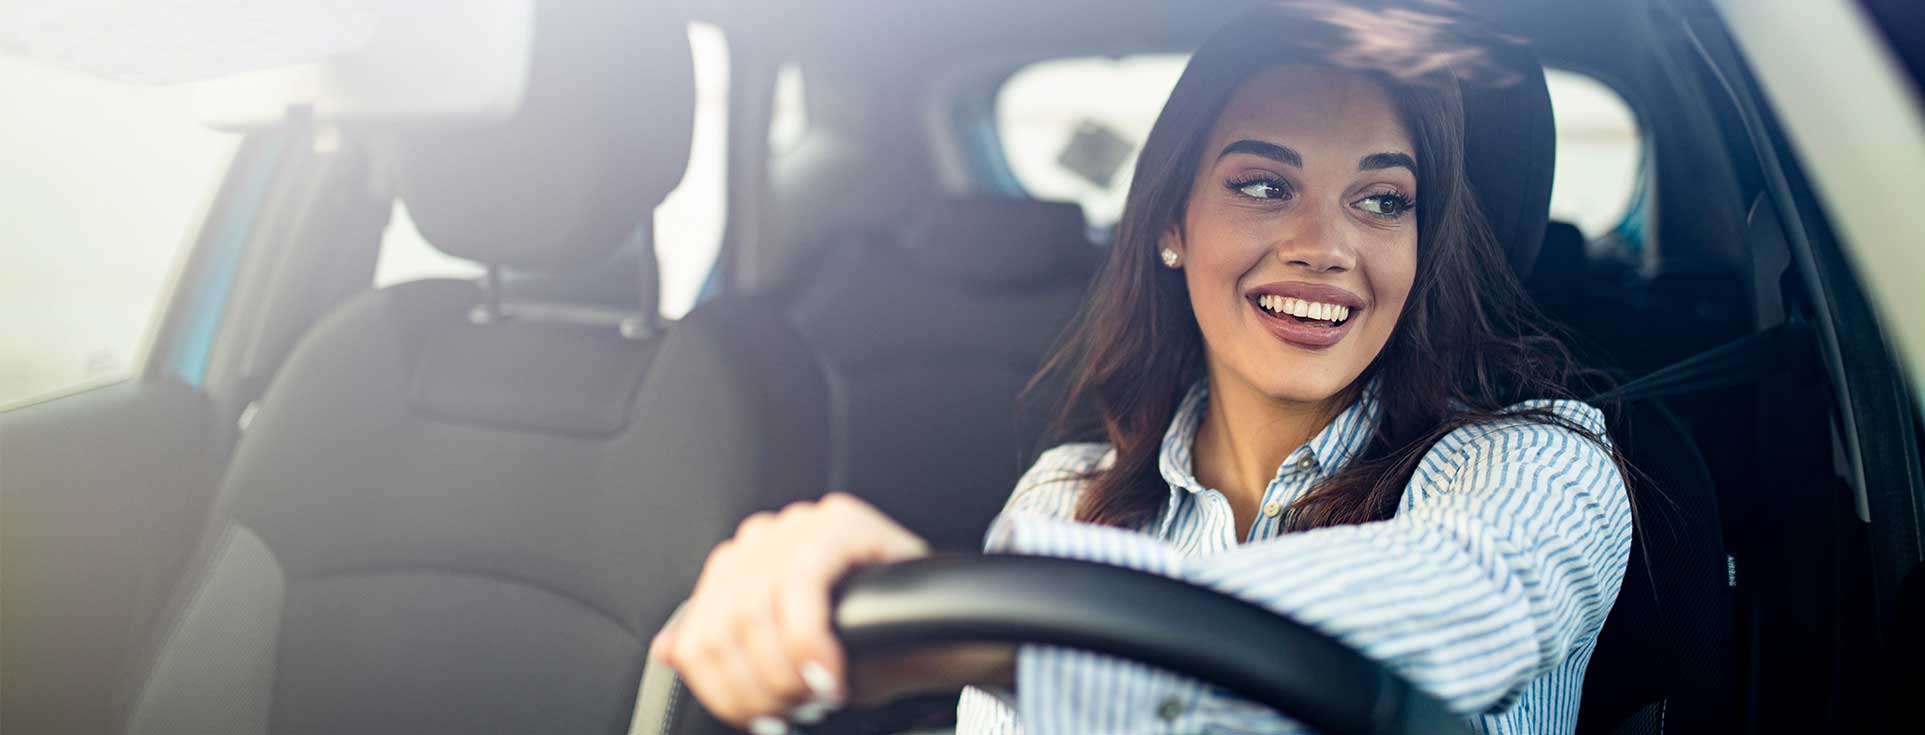 Woman smiling while driving vehicle